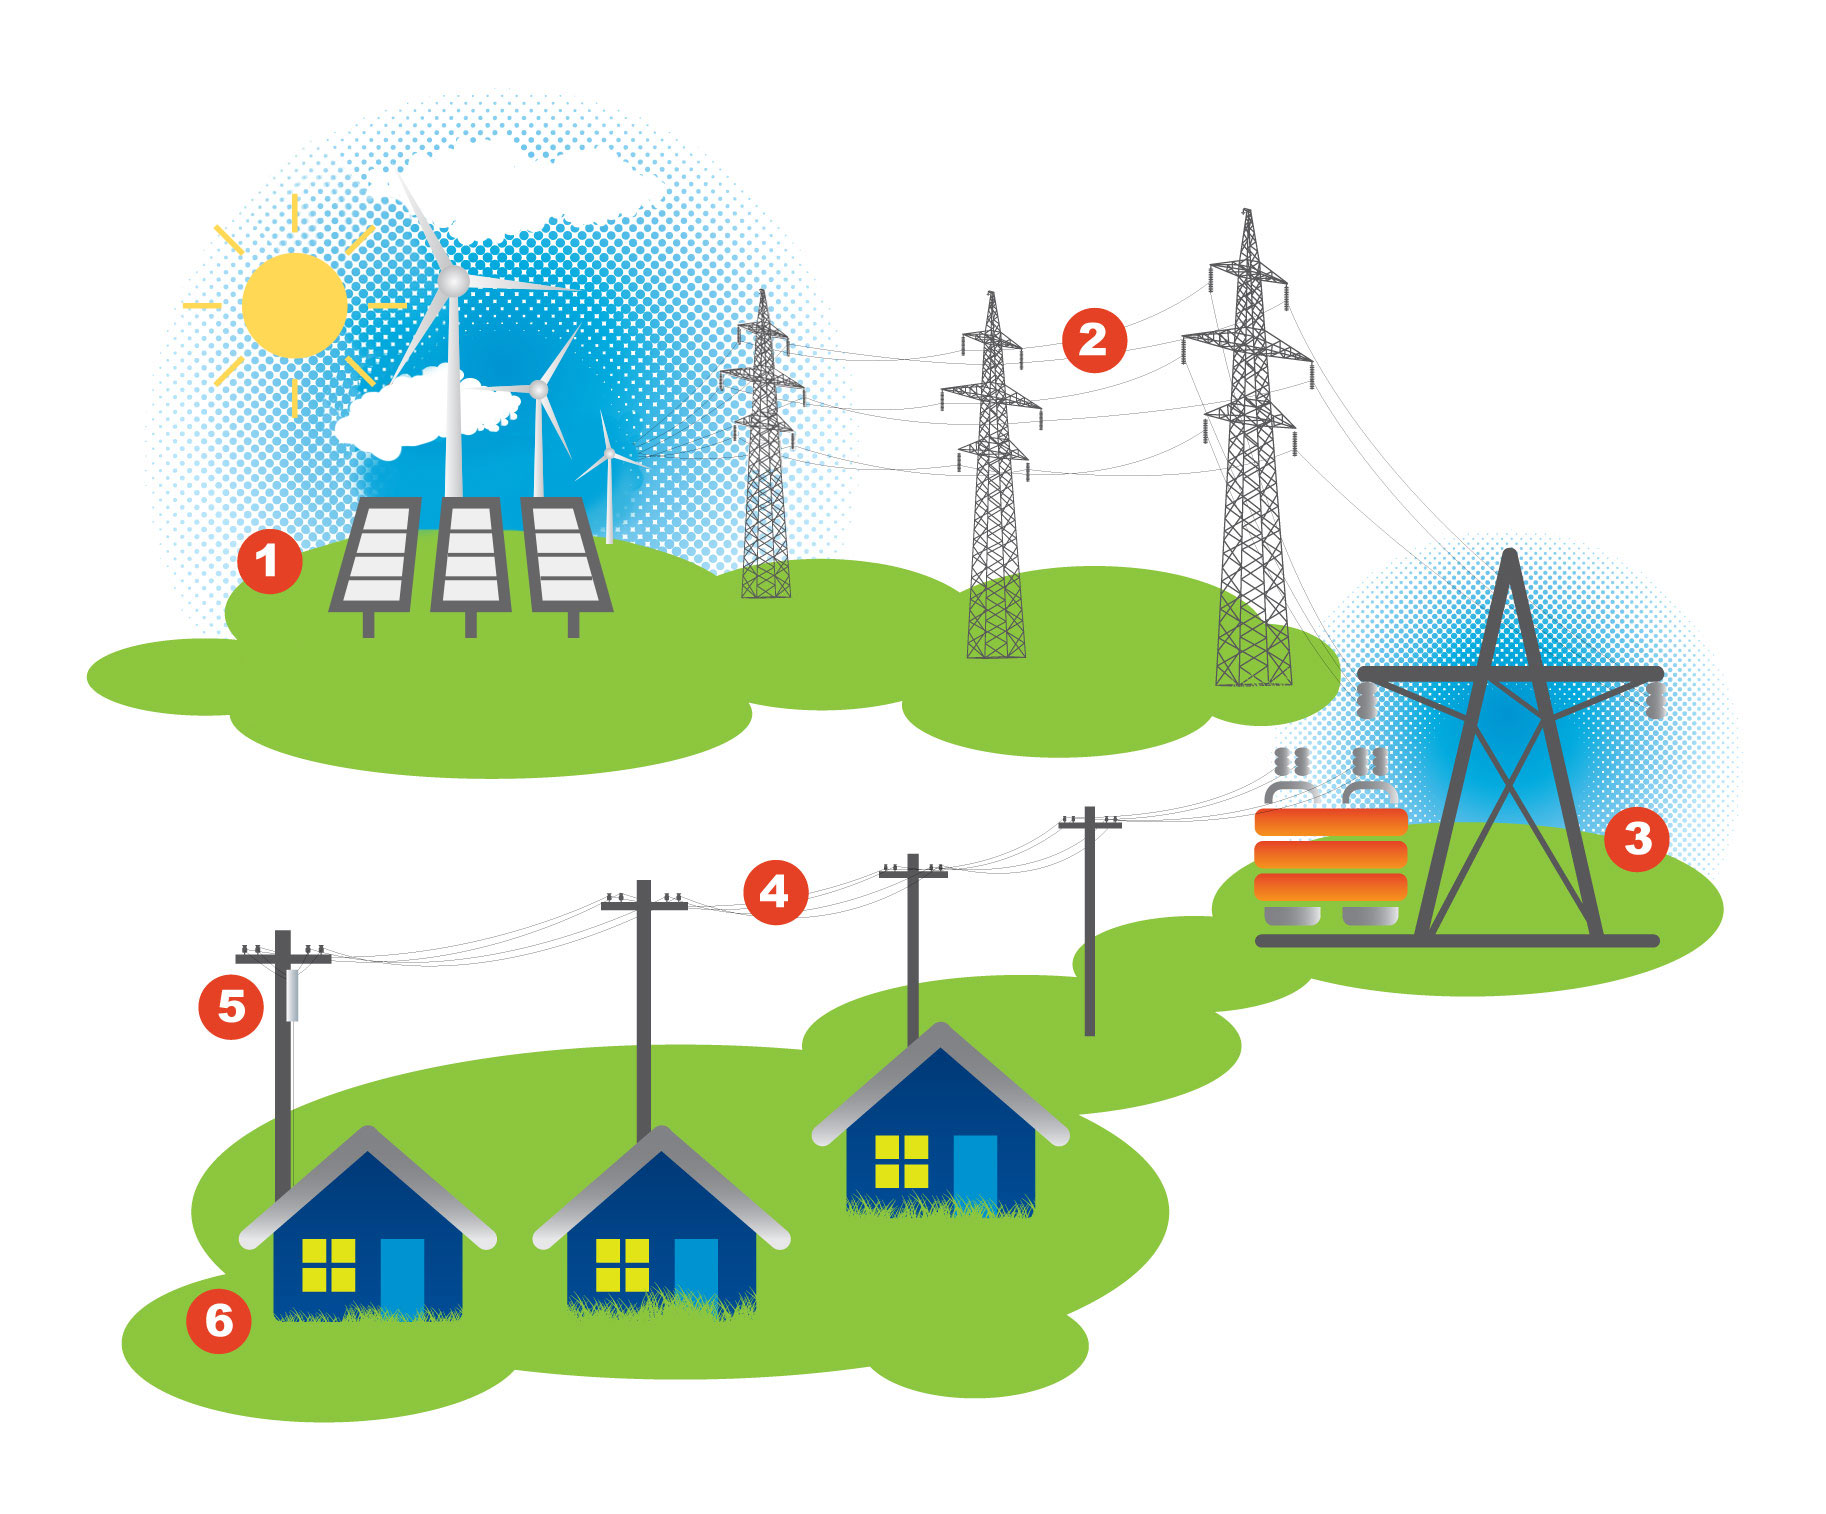 How Electricity Travels to Your Home Diagram: Electricity is generated, transported over high-voltage transmission lines, reduced at a substation, Lower voltage distribution lines, Overhead transformer further reduces voltage and Electricity delivered to your home